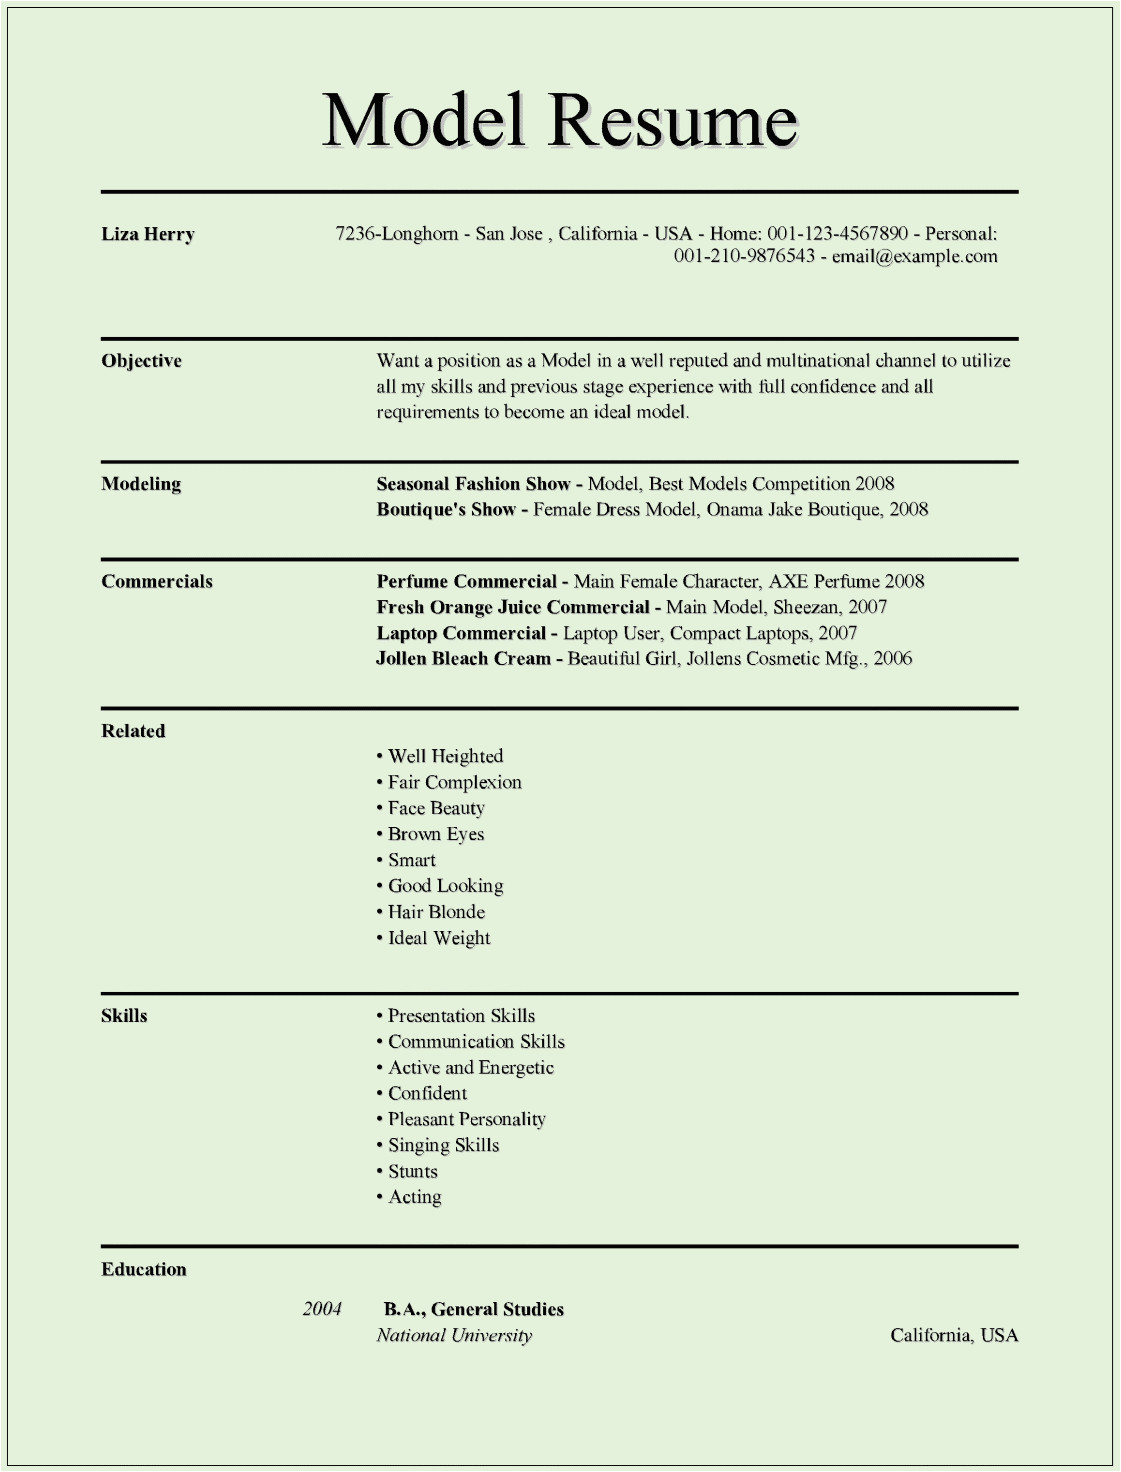 Model Basic Resume Model Resume Templates for Ms Word Free Example format